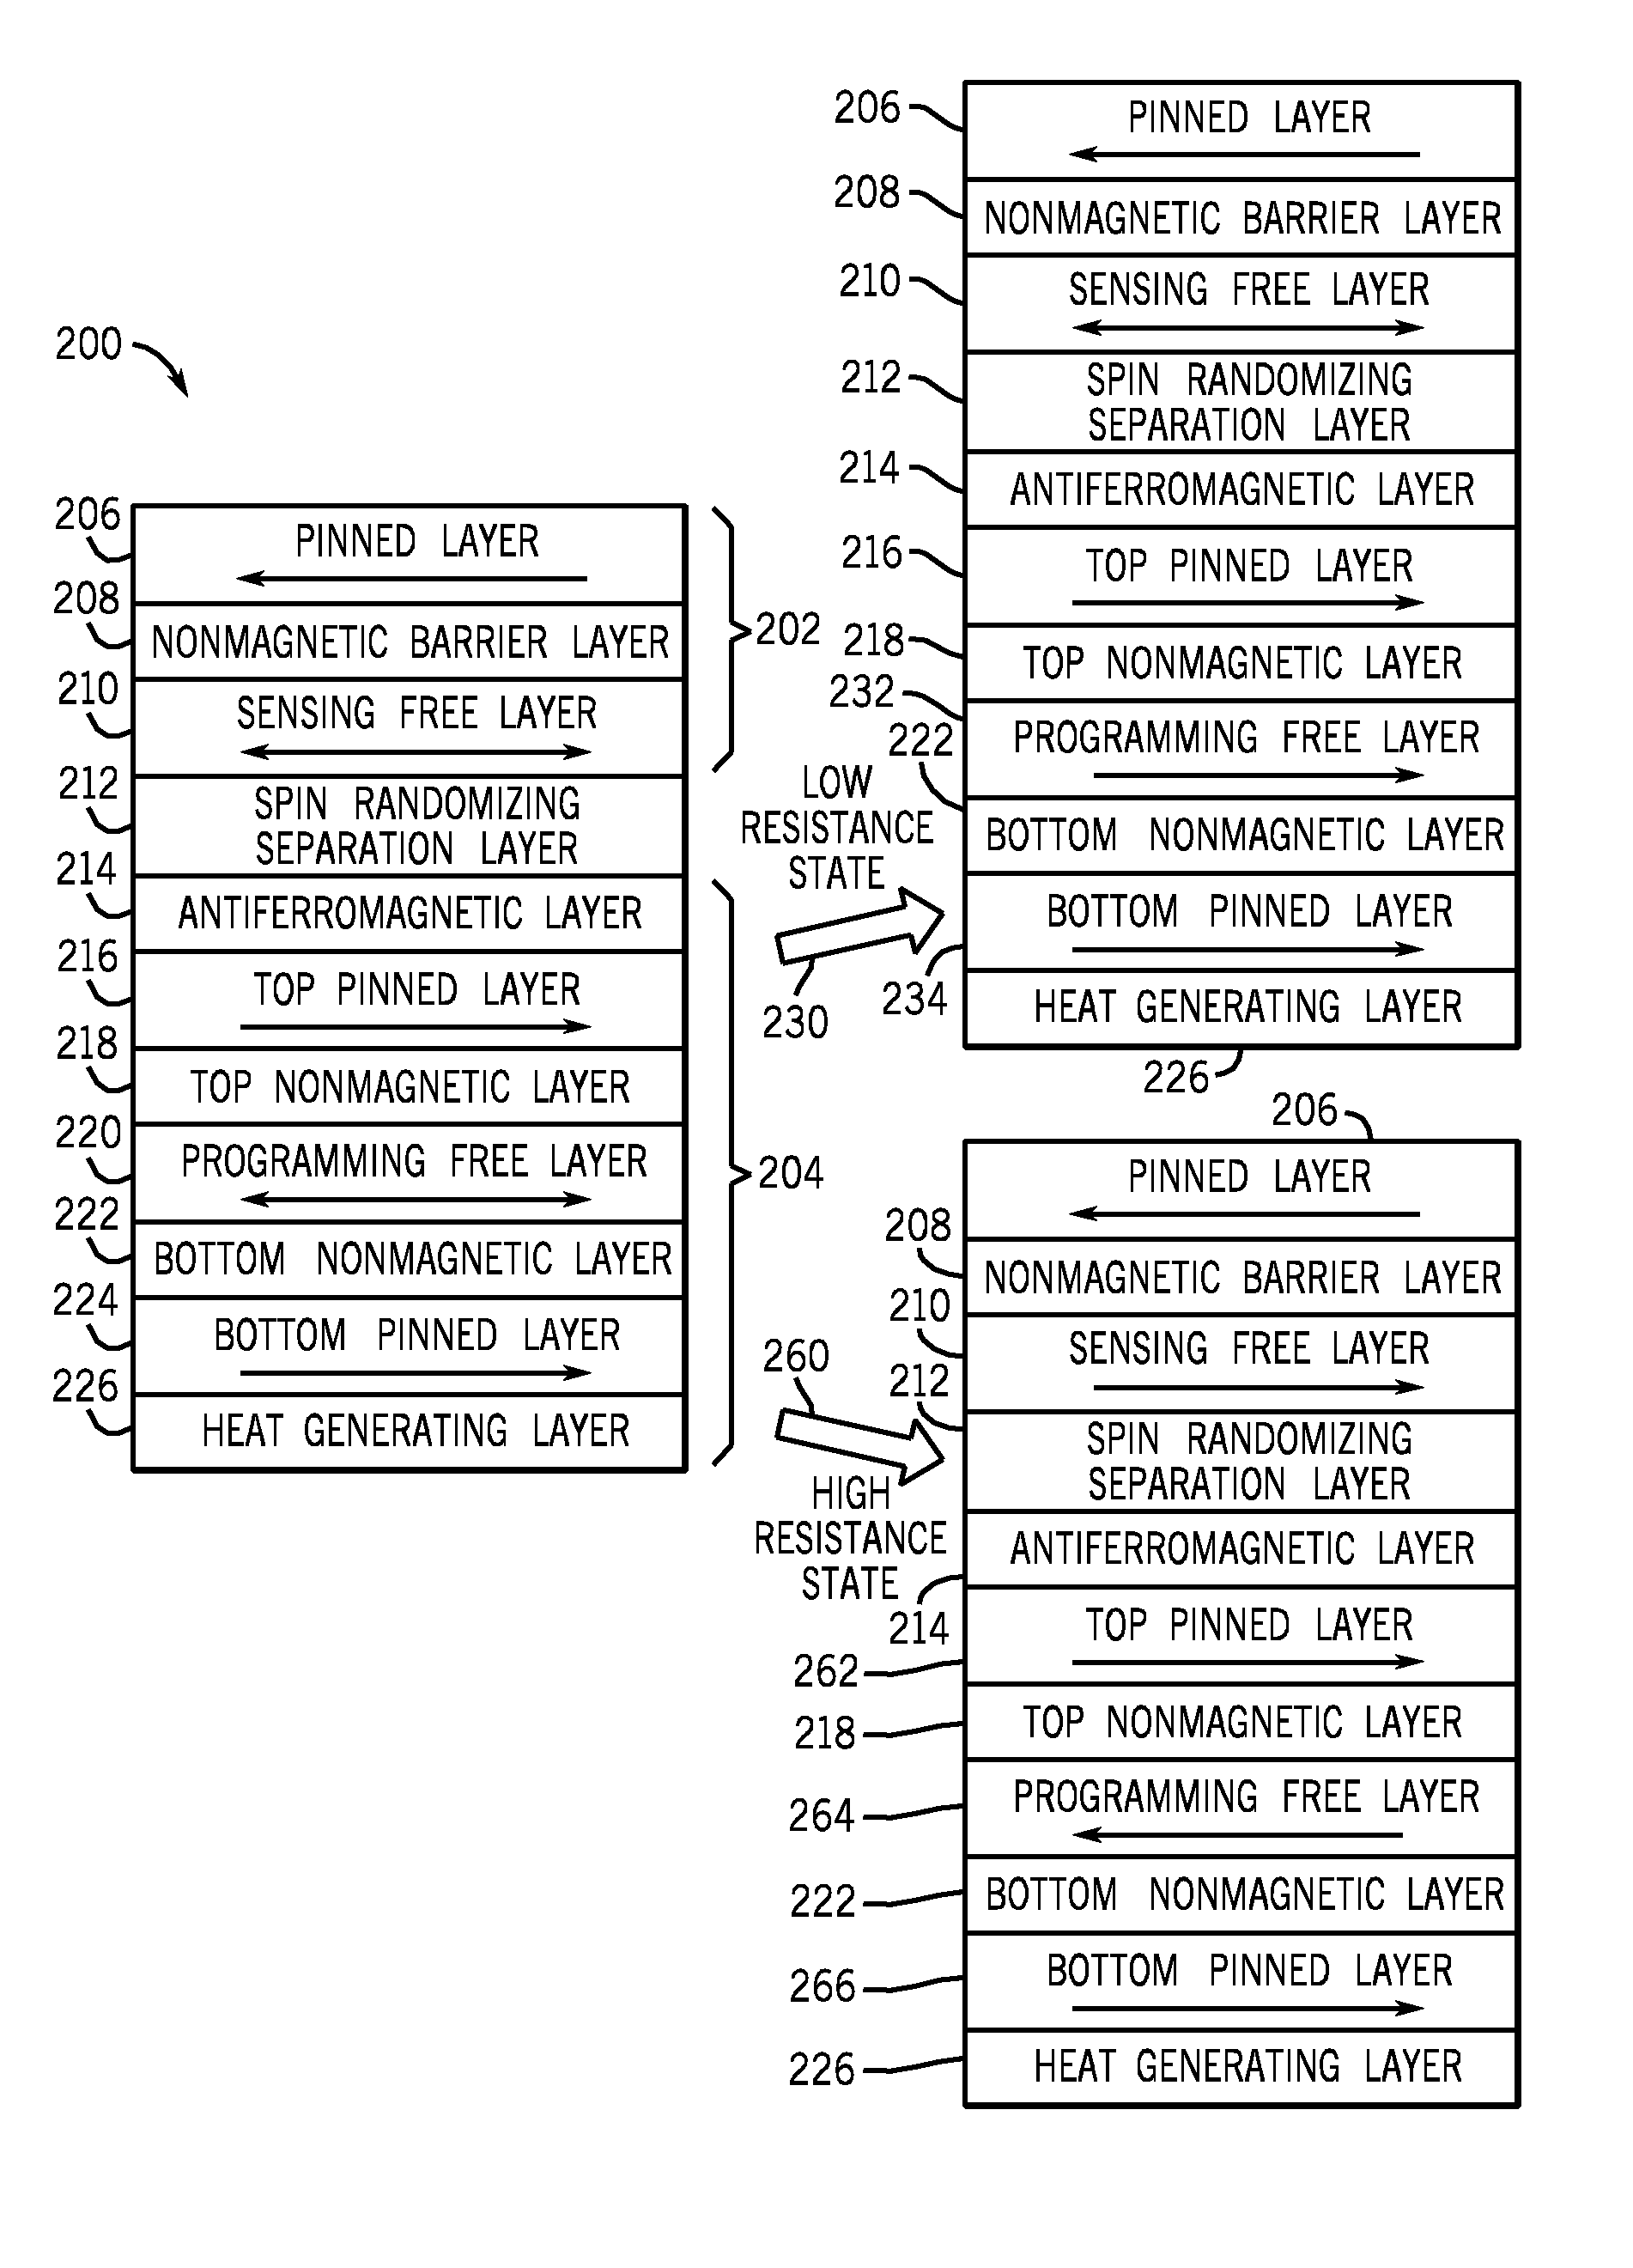 Unidirectional spin torque transfer magnetic memory cell structure